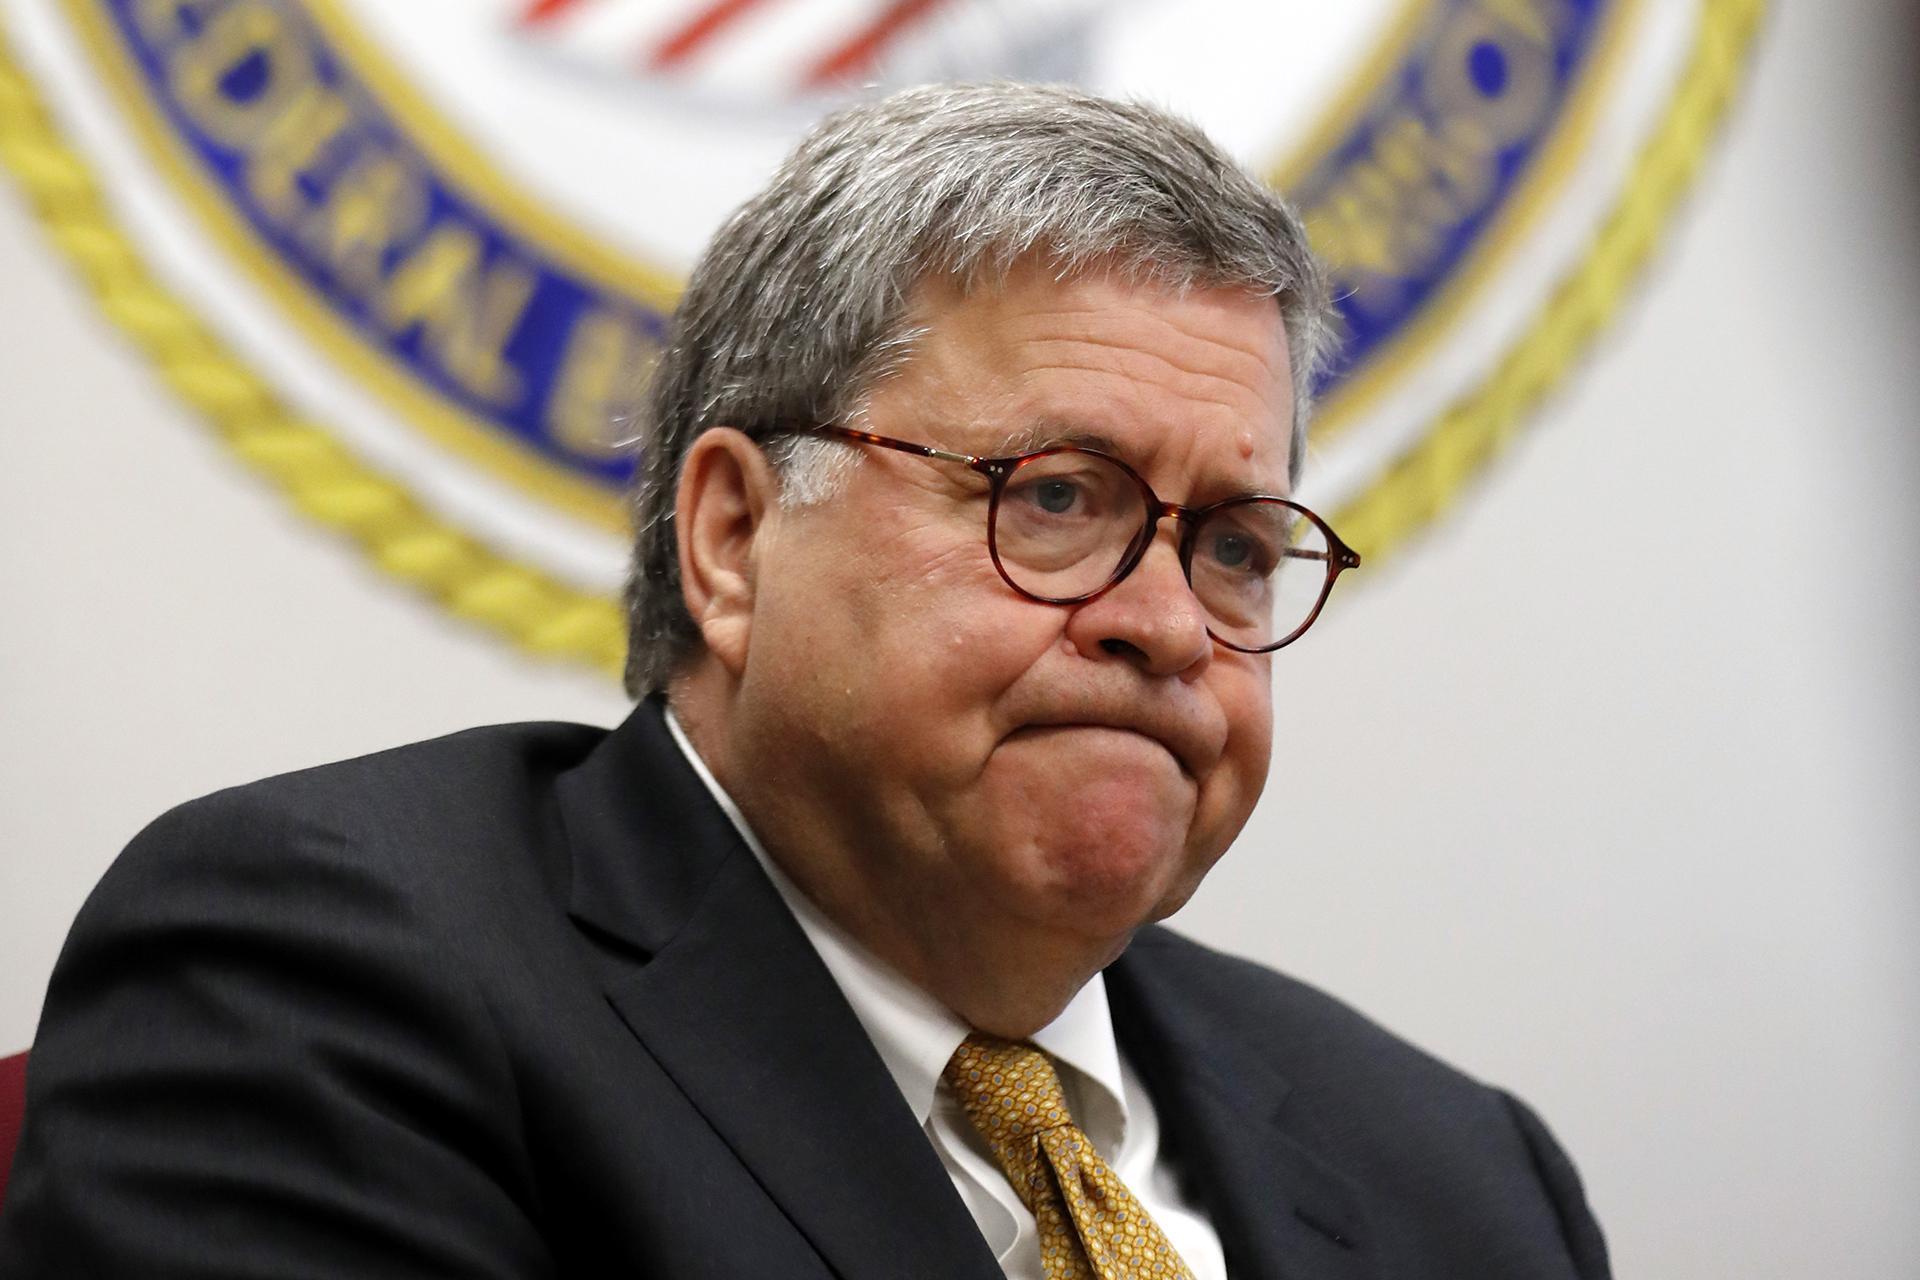 In this July 8, 2019 file photo, Attorney General William Barr speaks during a tour of a federal prison in Edgefield, South Carolina.  (AP Photo / John Bazemore)